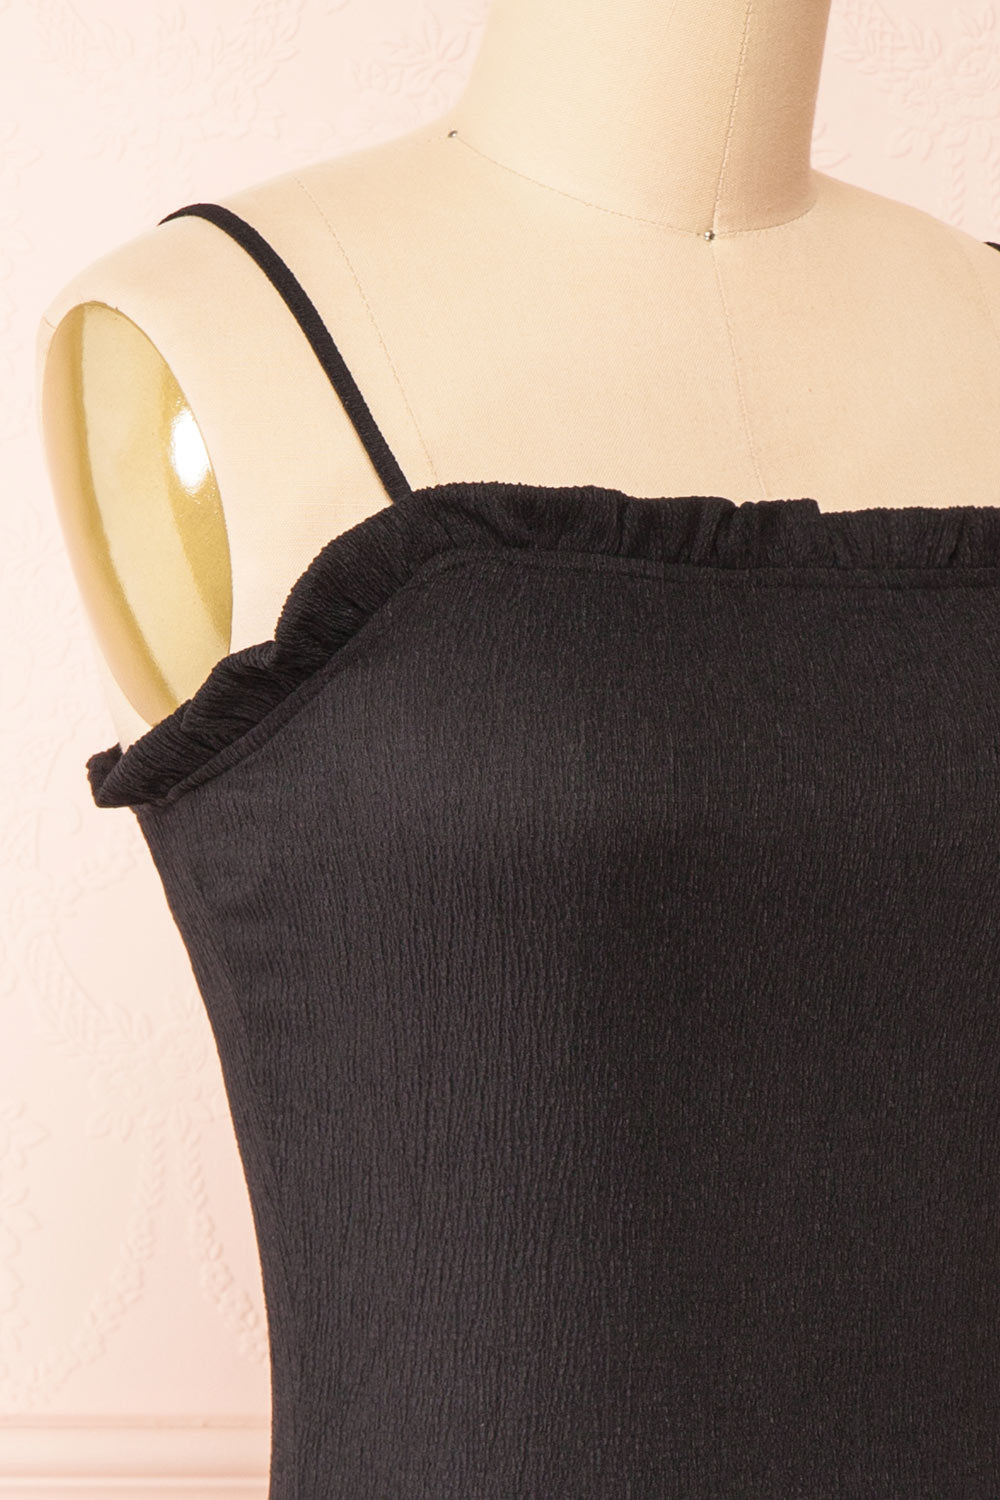 Chevy Black Fitted Short Dress w/ Ruffles | Boutique 1861 side close-up